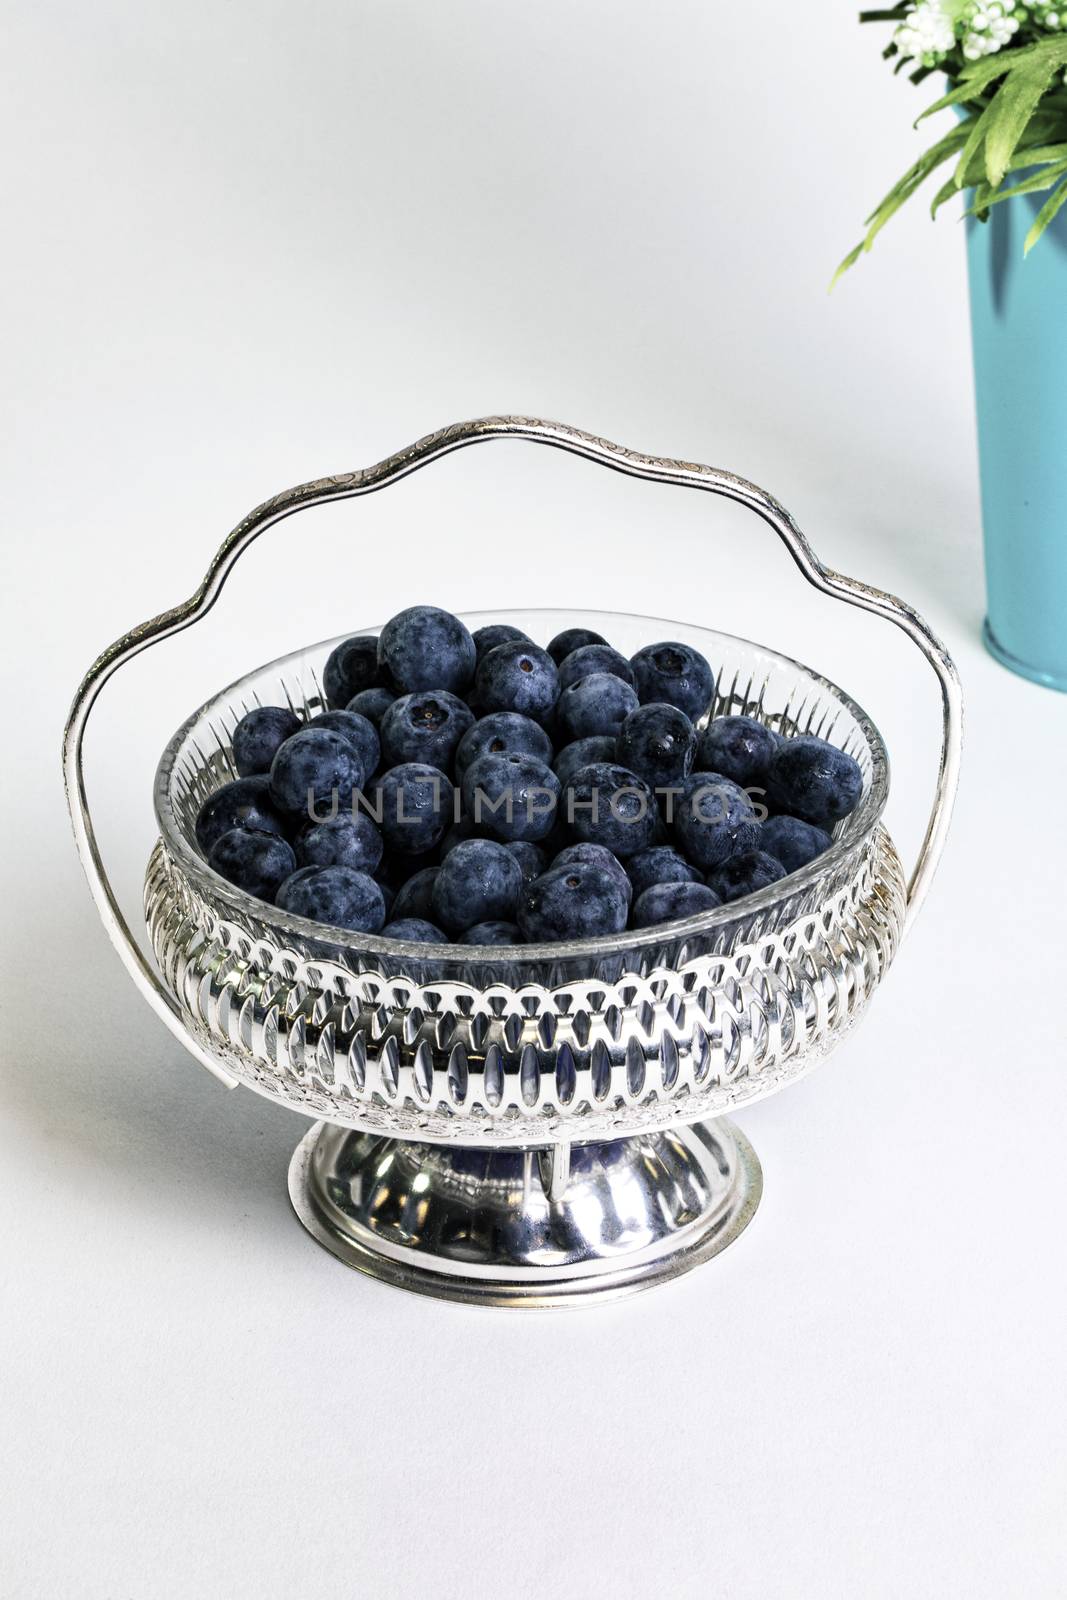 Plump, ripe blueberries in antique silver filigree bowl.